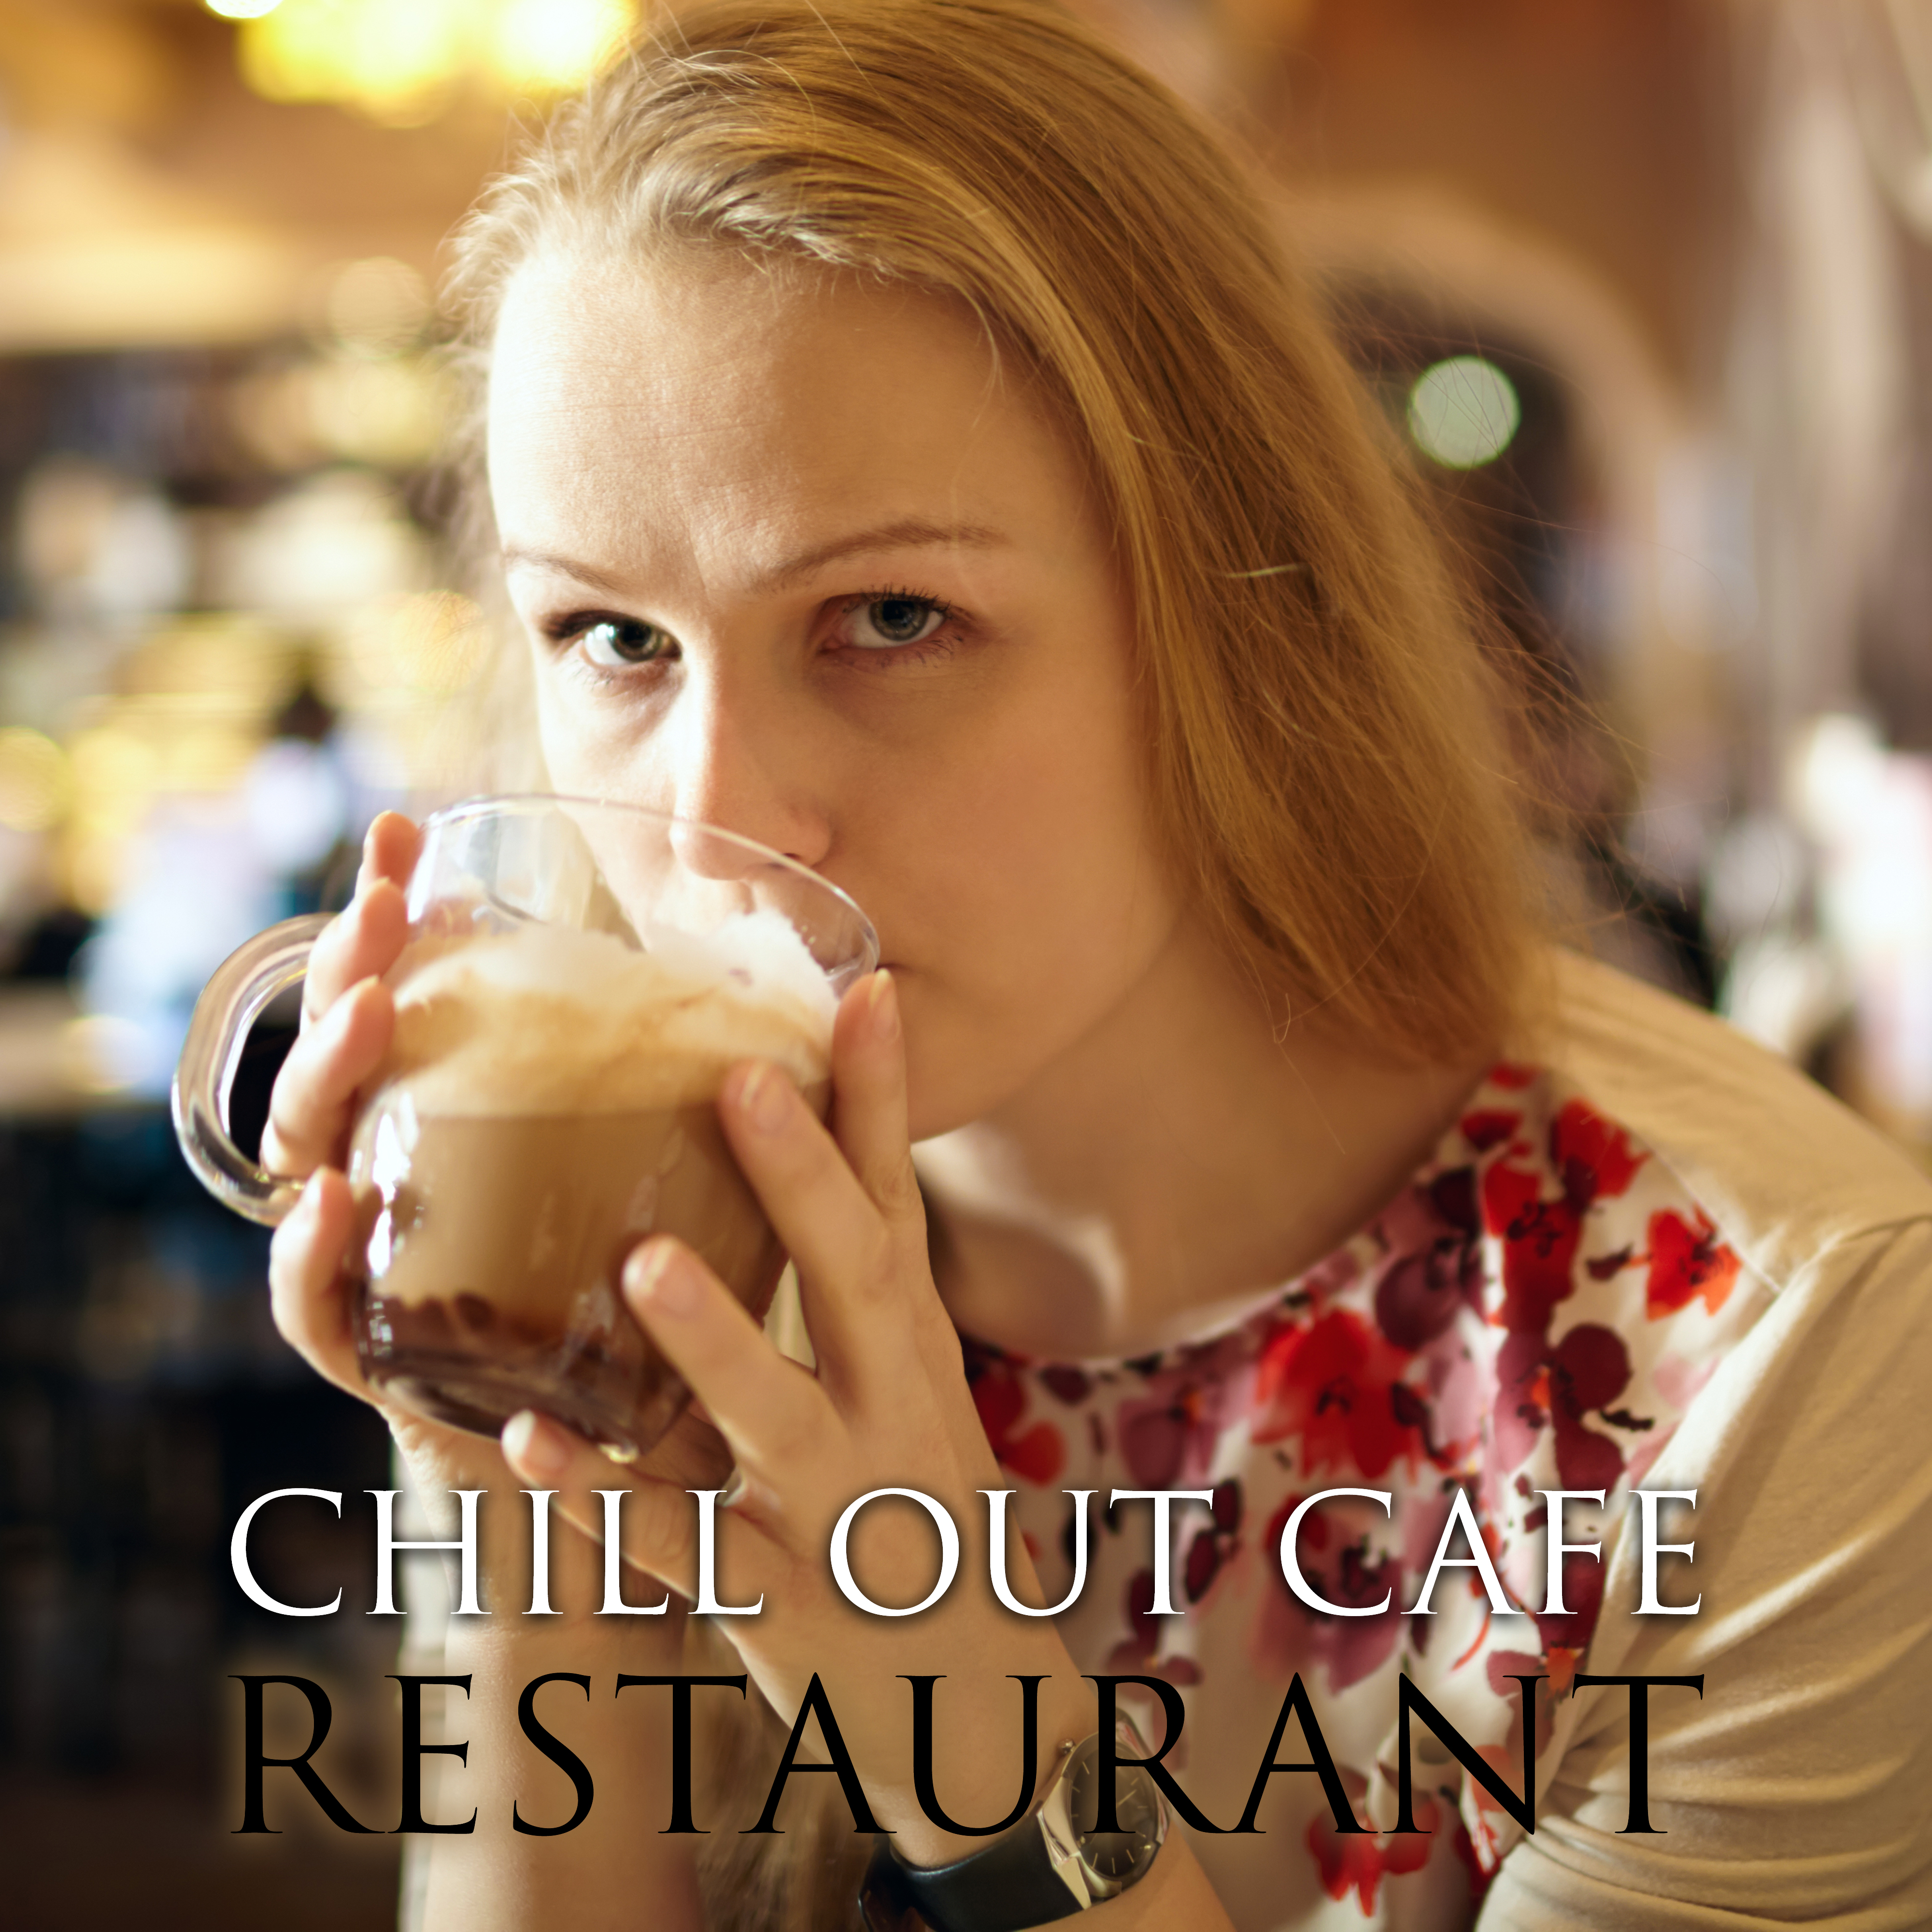 Chill Out Cafe Restaurant  Summer Songs to Relax, Chilled Melodies to Rest, Easy Listening